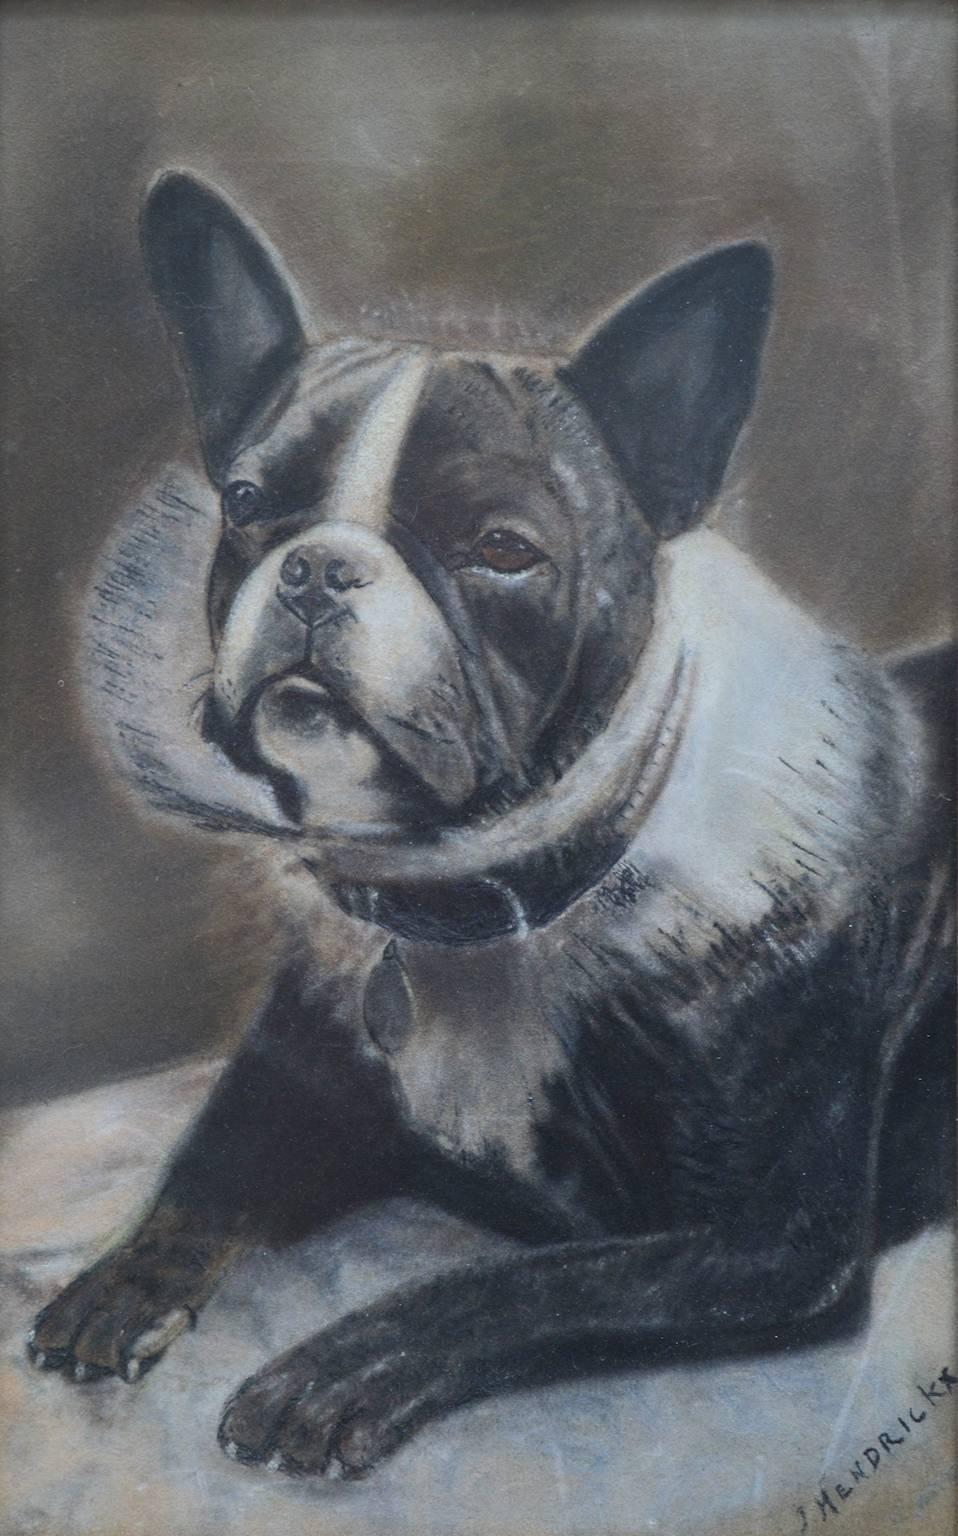 A pair of Belgian drawings of French bulldogs signed and dated 1932. Drawings executed in charcoal using the grisaille technique giving the drawings a photo-like feeling. The dogs are both wearing wide black badger-hair fringed collars.
These